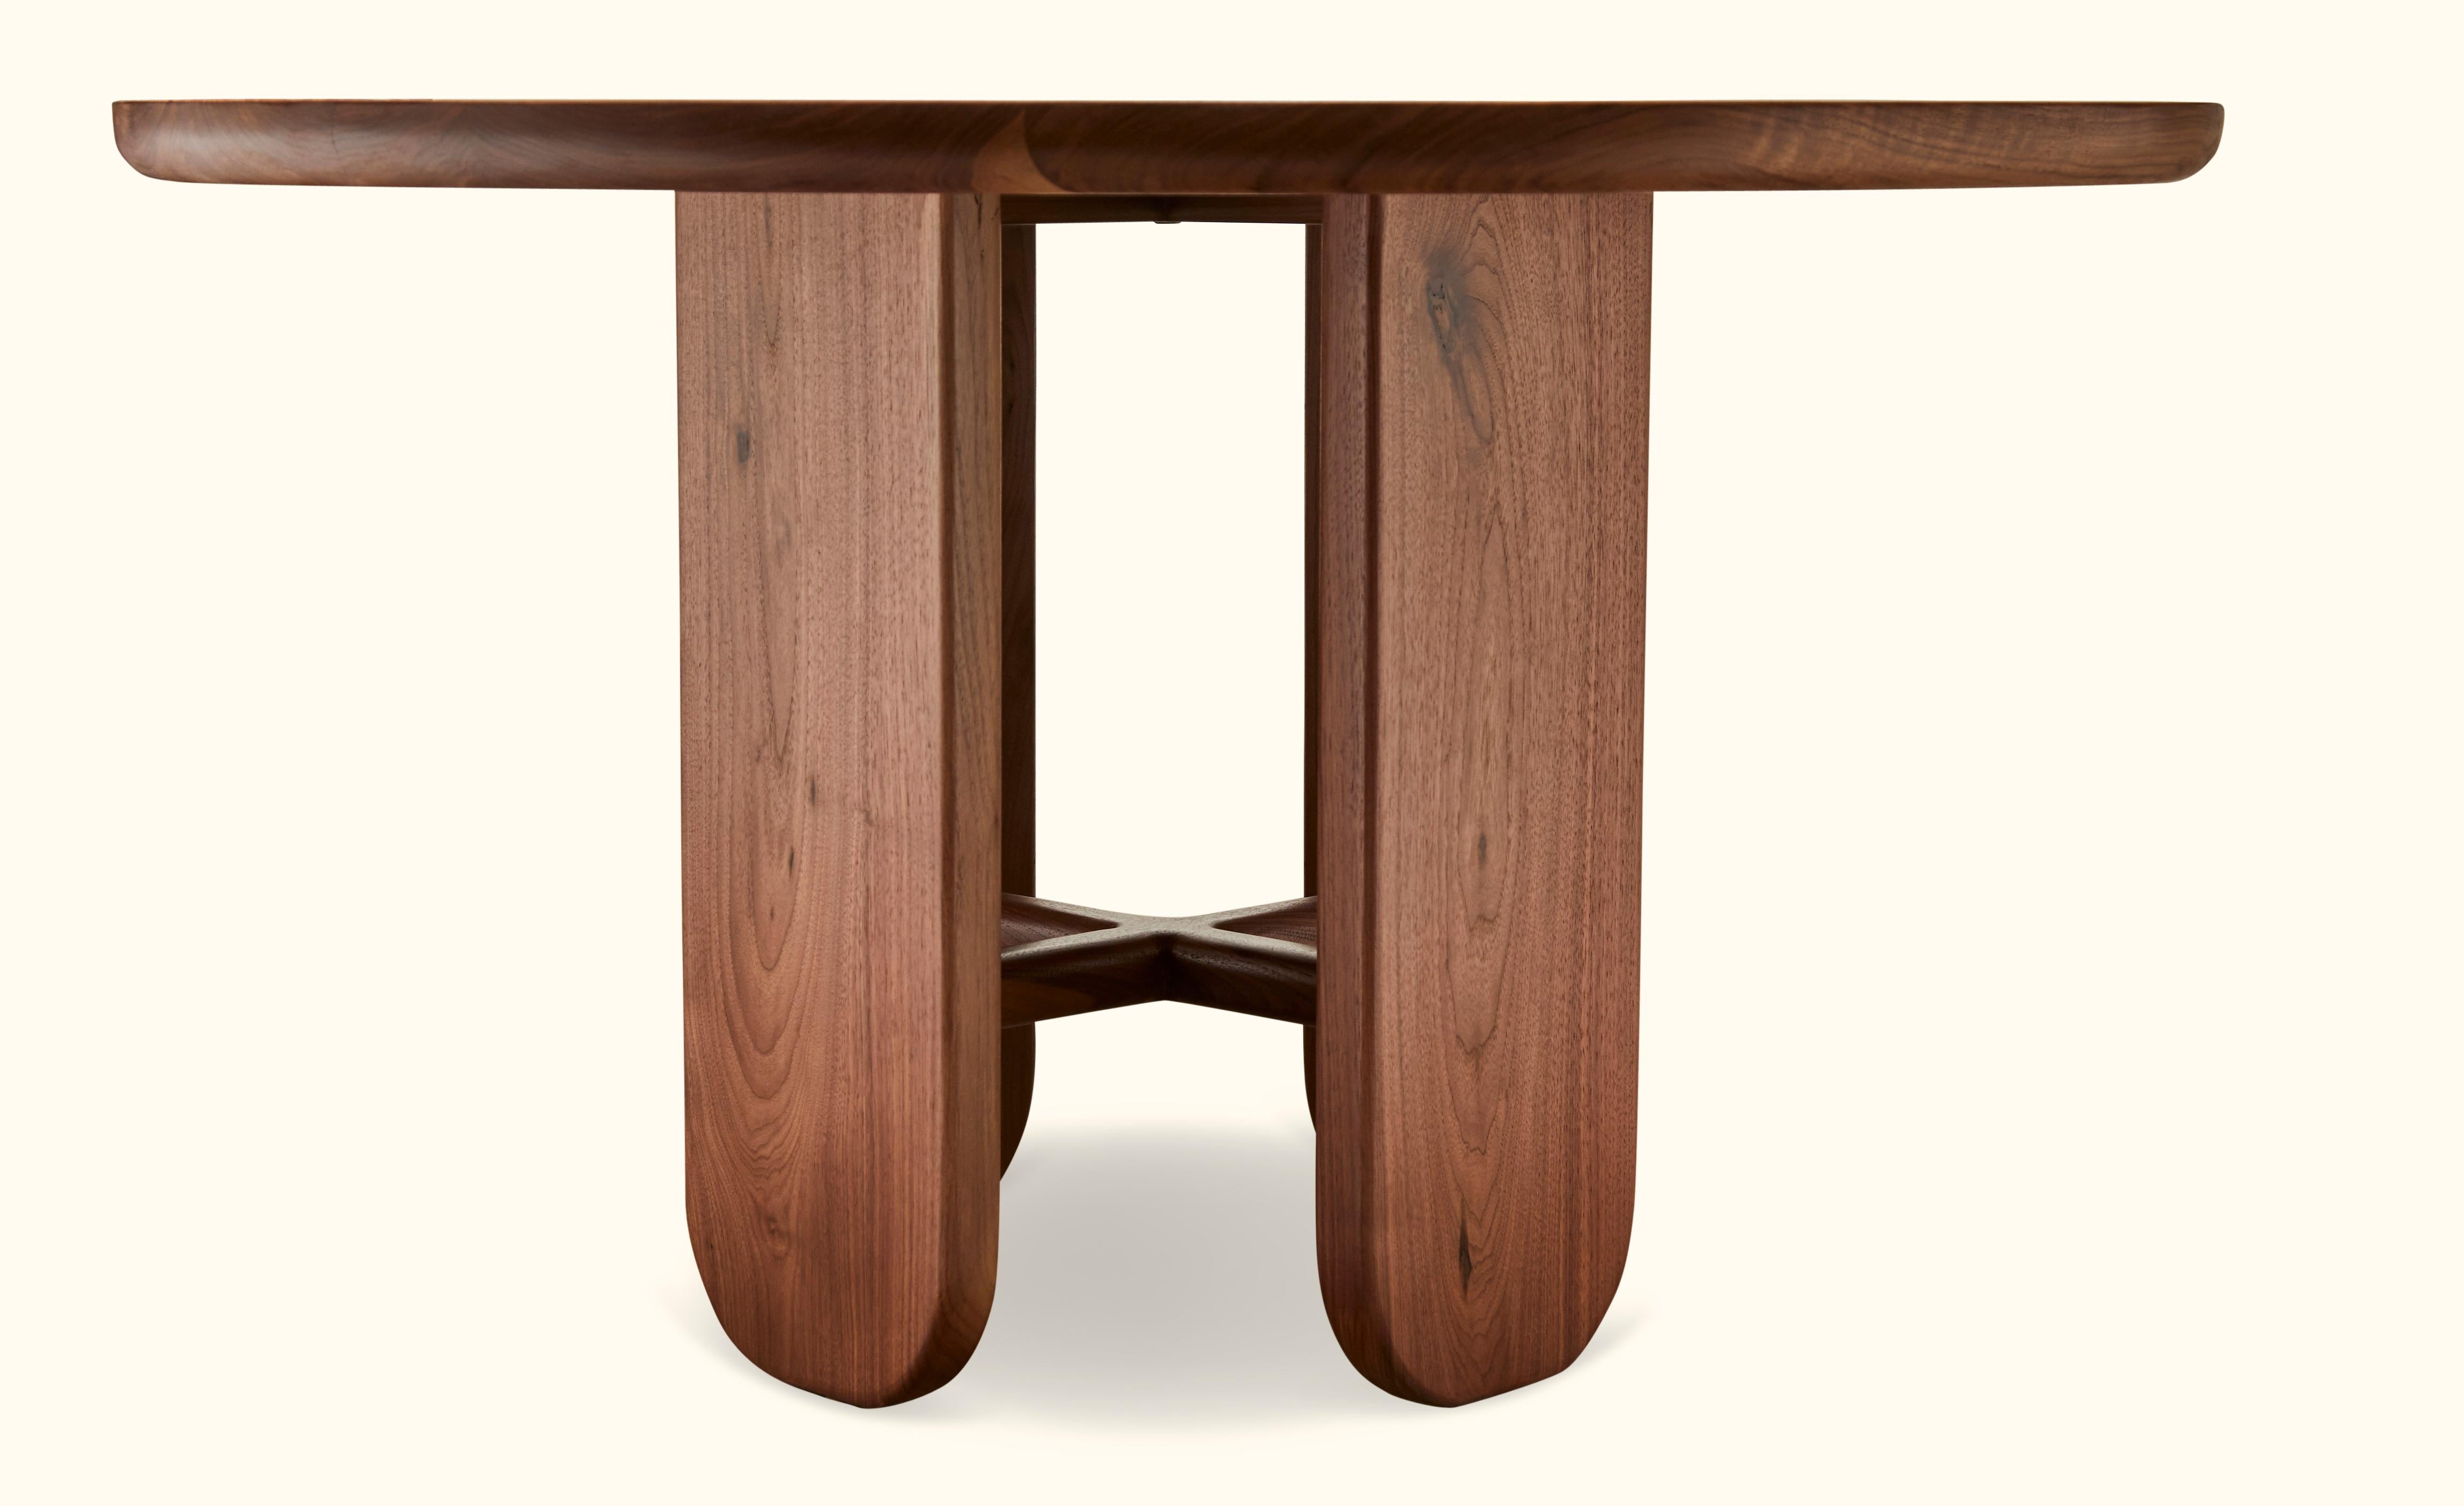 The rainier dining table is part of the collaborative collection with interior designer Brian Paquette featuring a parquet or solid wood top and four pedestal legs connected with a solid wood stretcher. Shown here in natural walnut. Available